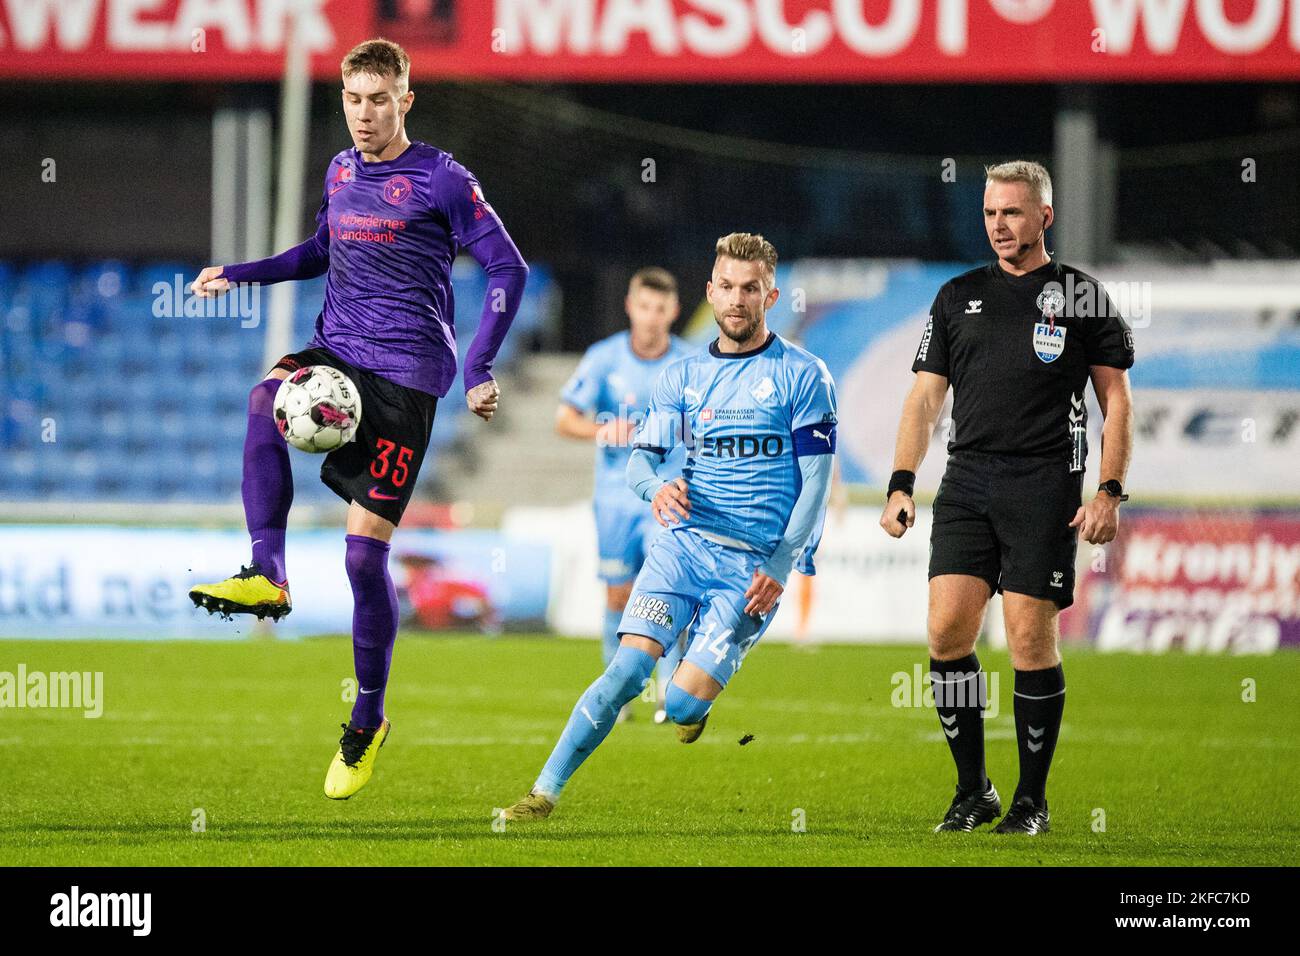 Randers, Denmark. 13th, November 2022. Charles (35) of FC Midtjylland and Frederik Lauenborg (14) of Randers FC seen during the 3F Superliga match between Randers FC and FC Midtjylland at Cepheus Park in Randers. (Photo credit: Gonzales Photo - Balazs Popal). Stock Photo